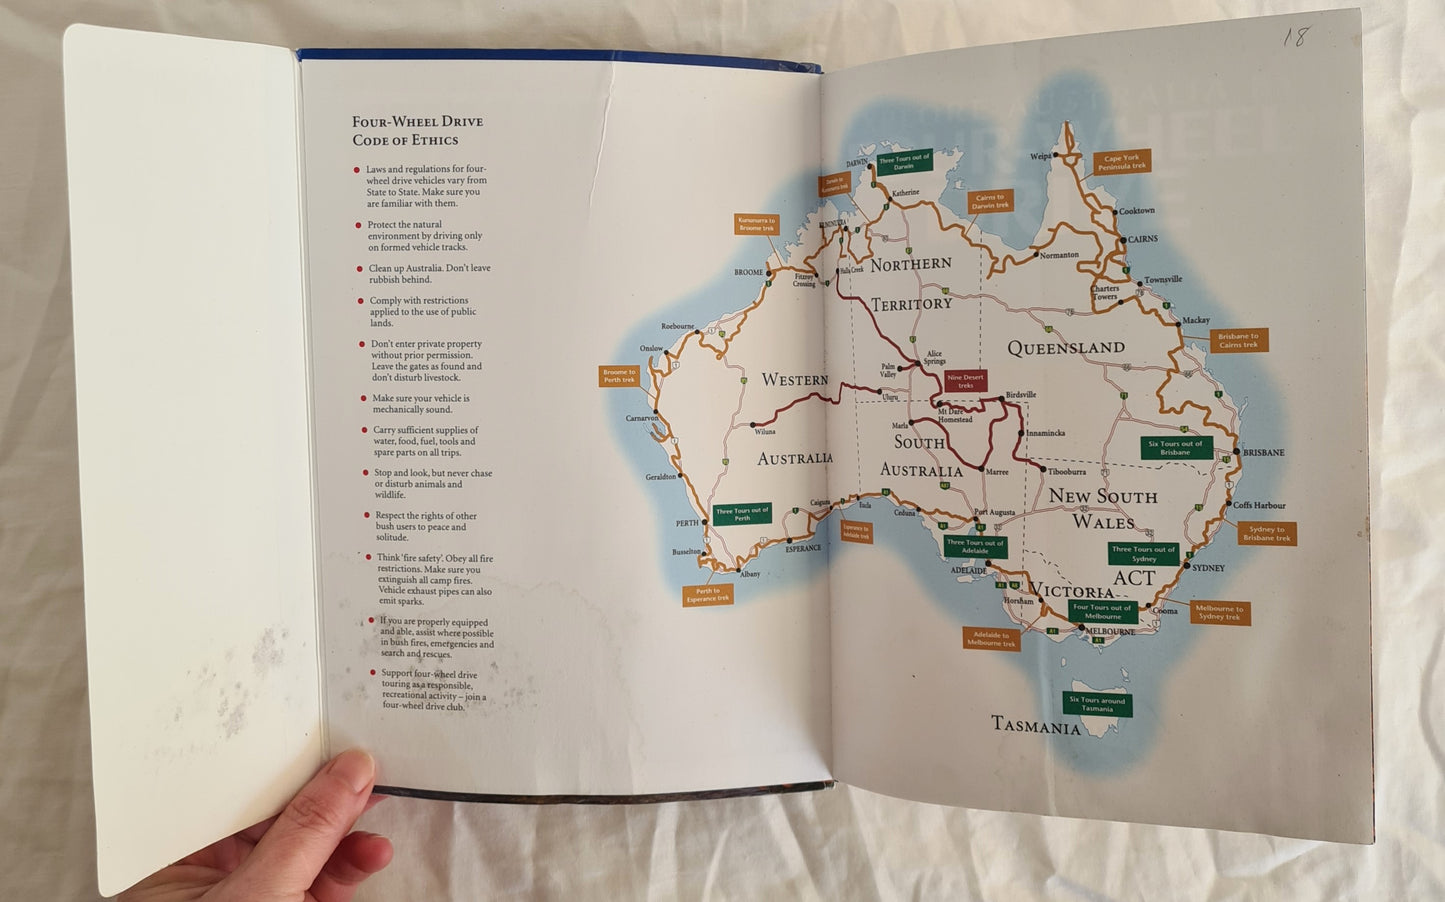 Explore Australia by Four-Wheel Drive by Penguin Cartographic